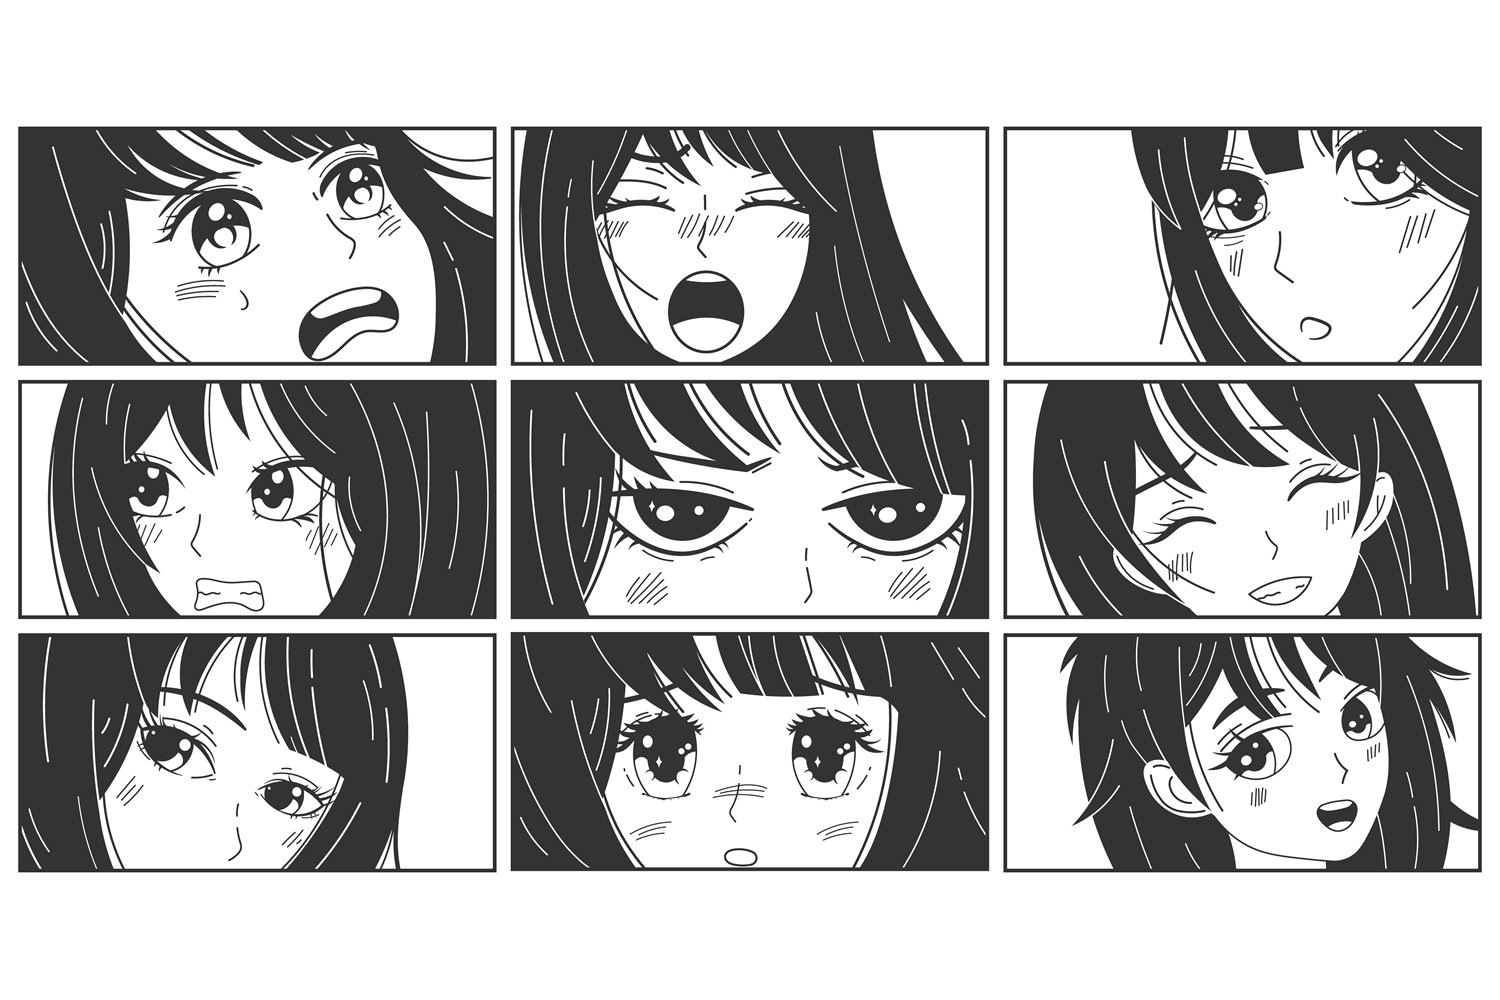 9 black and white comic posters of an anime cute woman on a white background.